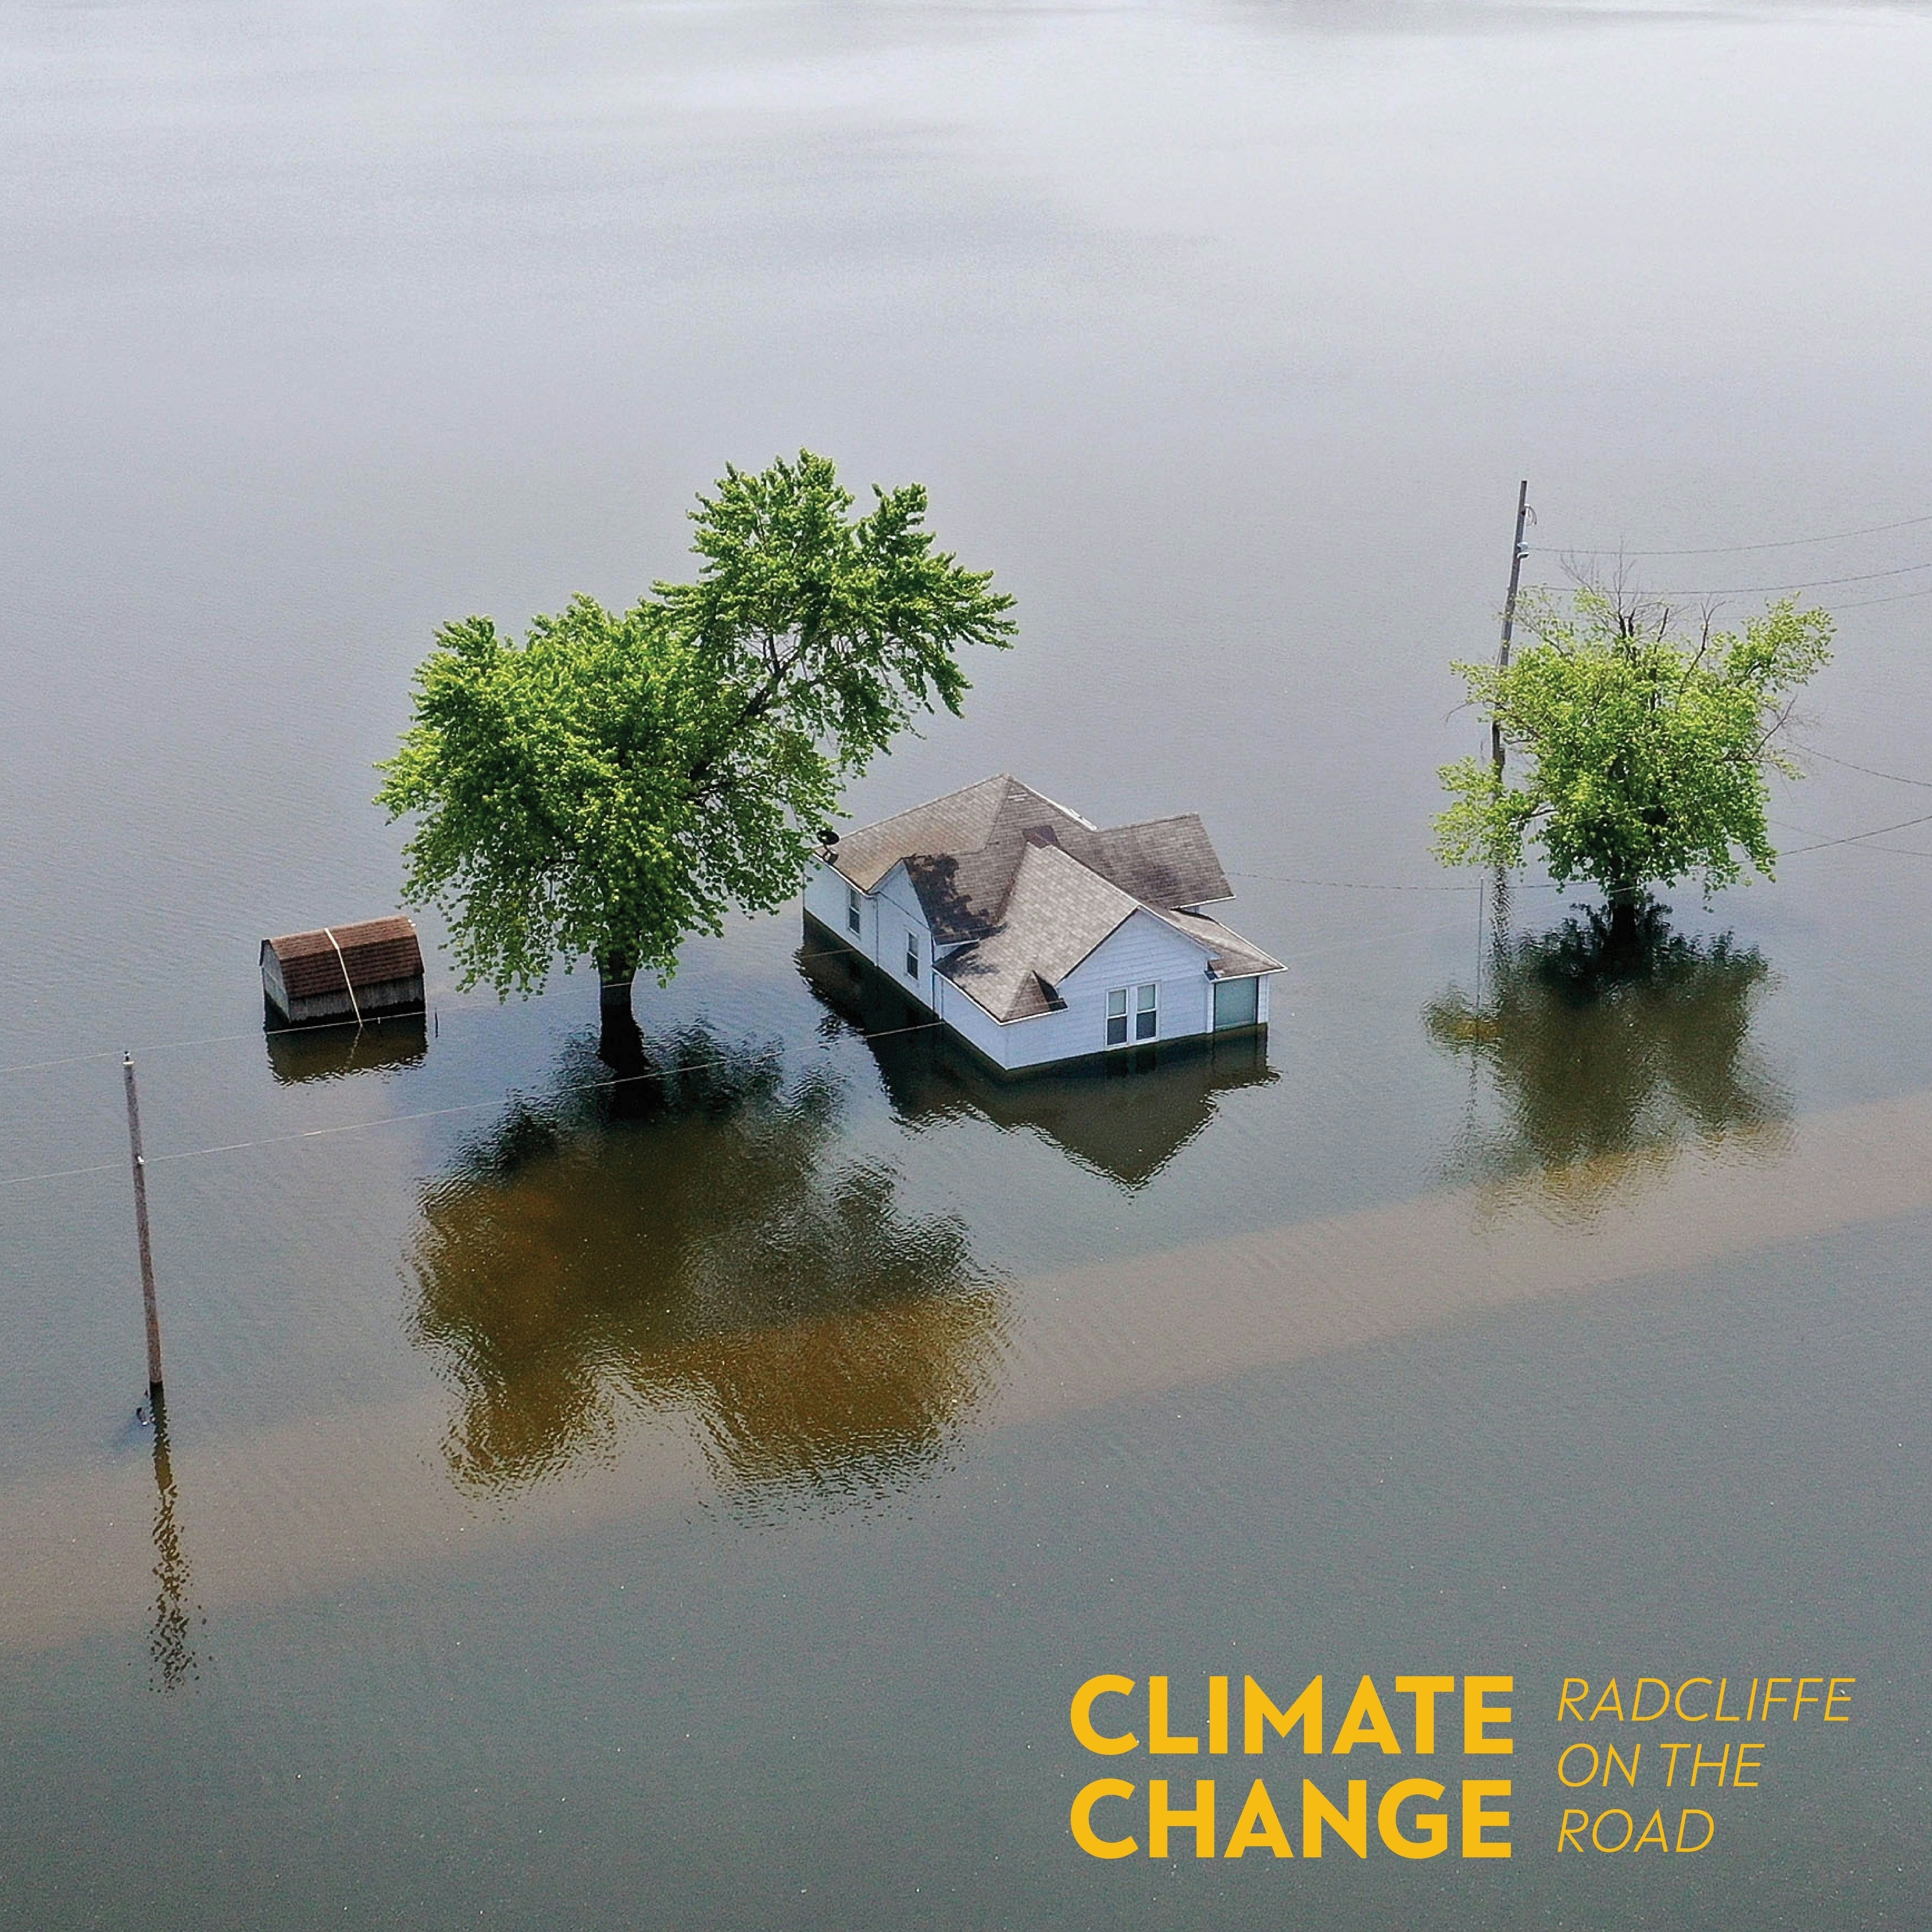 Photo of a house and trees in flooded water